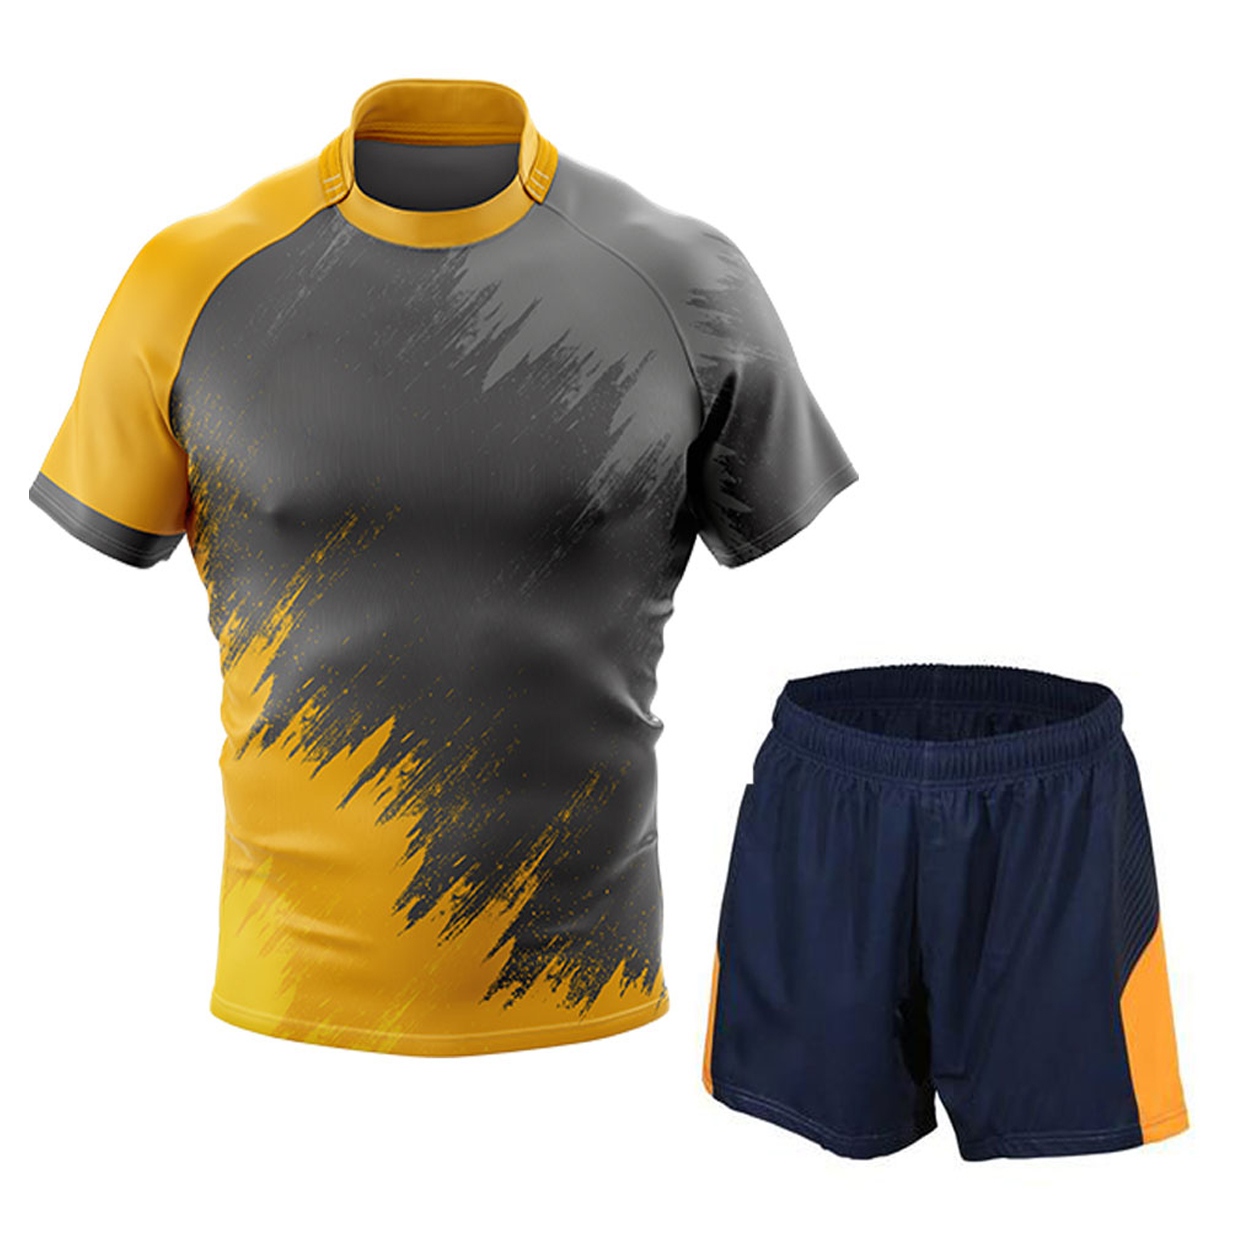 Men's Custom Sublimated Crash Fit (Loose) Rugby Jersey